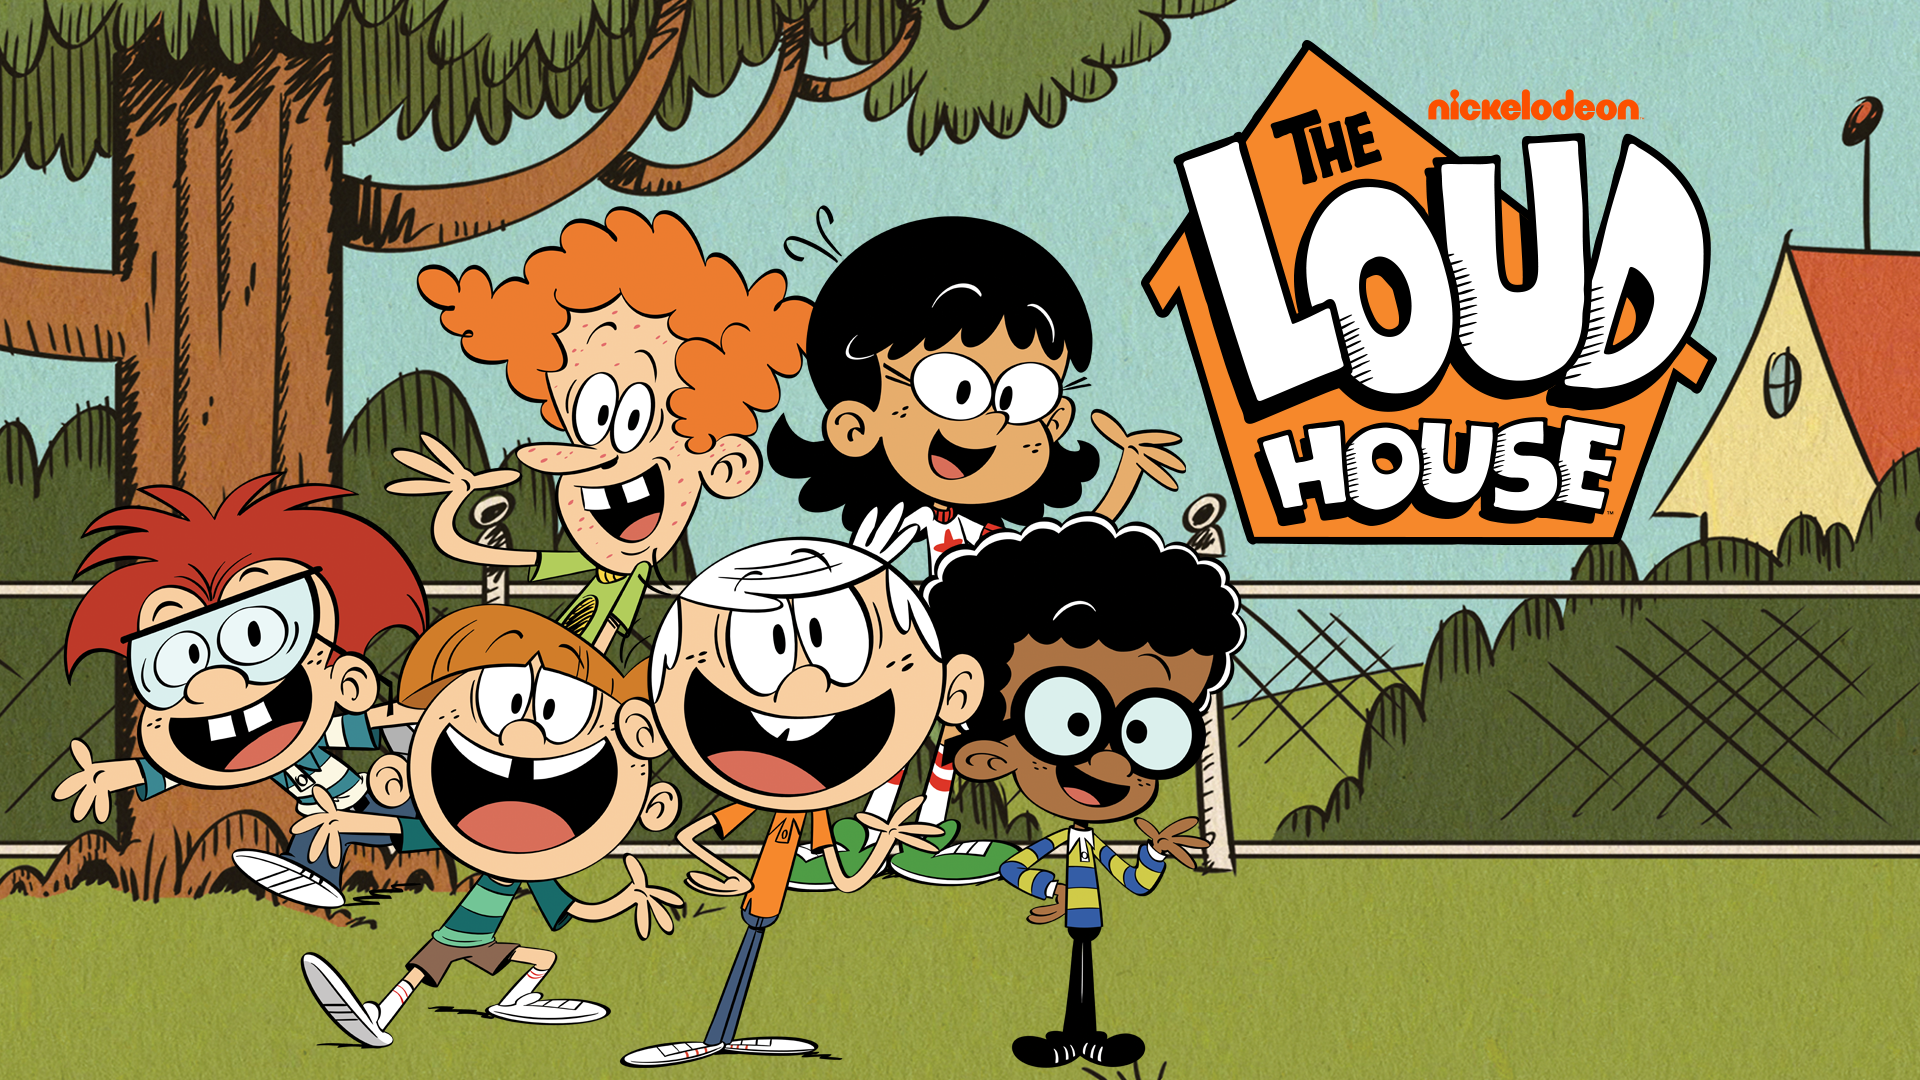 NickALive!: Nickelodeon Australia and New Zealand to Host 'The Loud House' Premiere Week Beginning Oct.